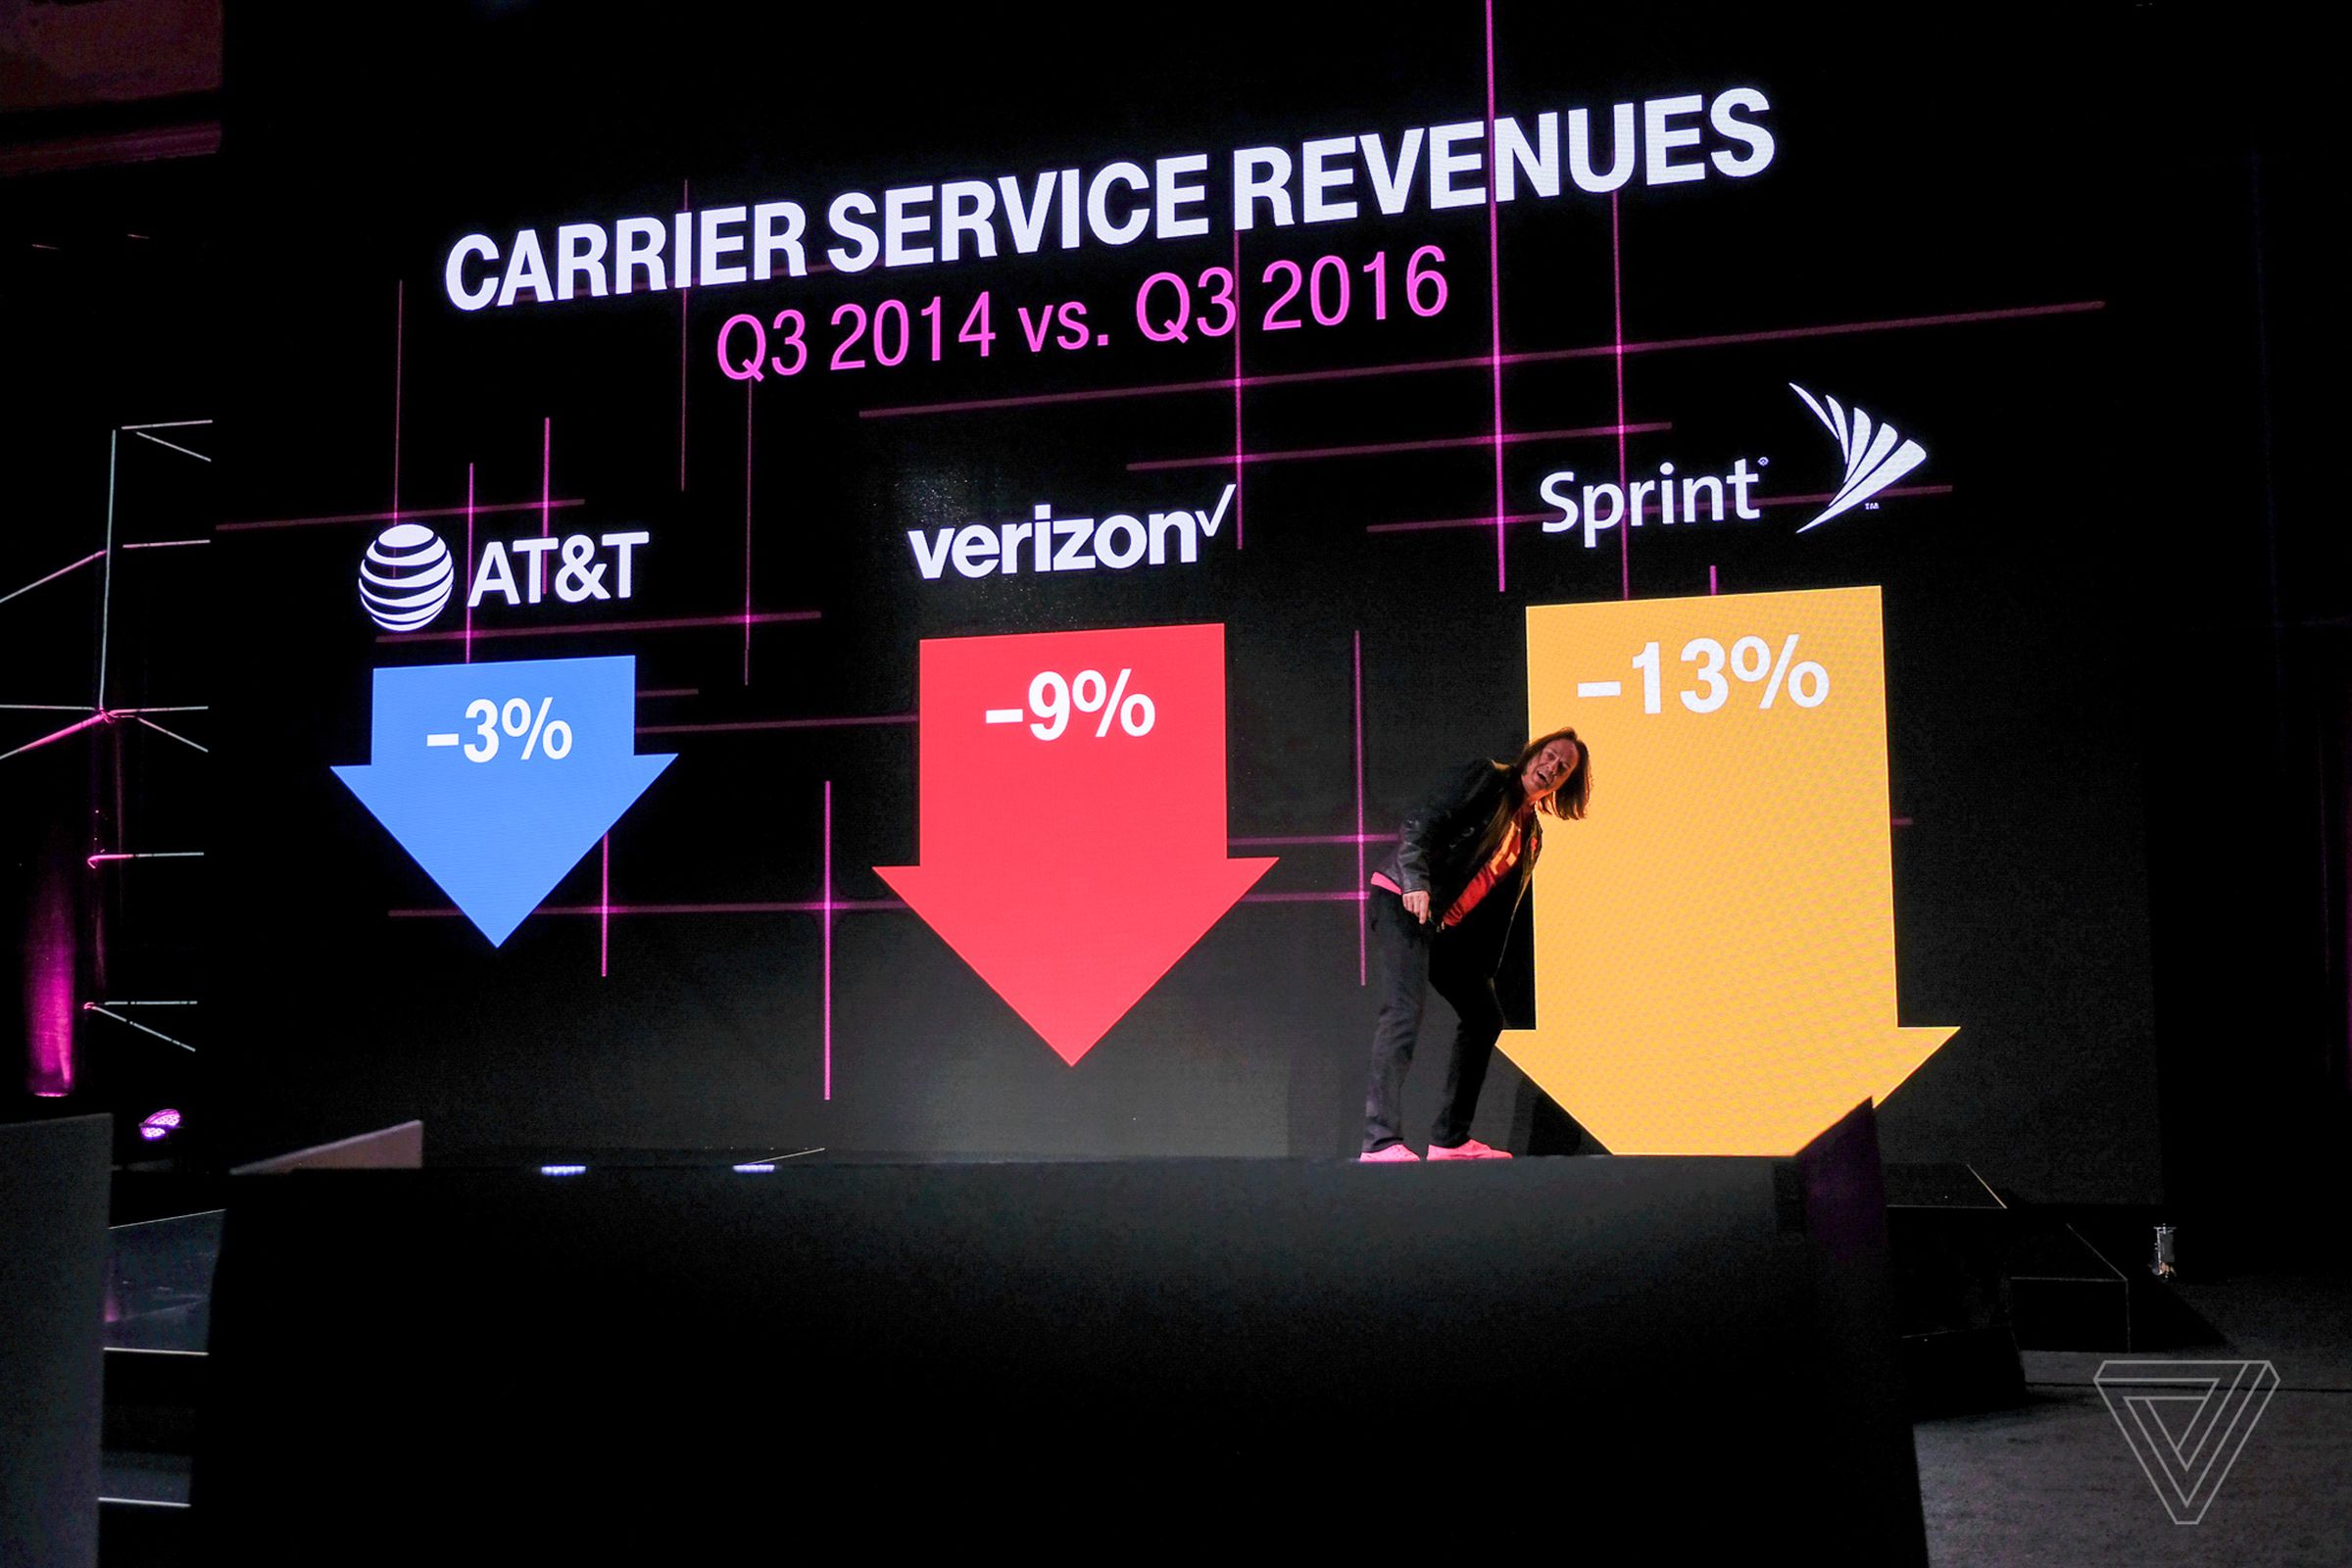 Legere was particularly harsh towards Sprint during today’s T-Mobile media event.